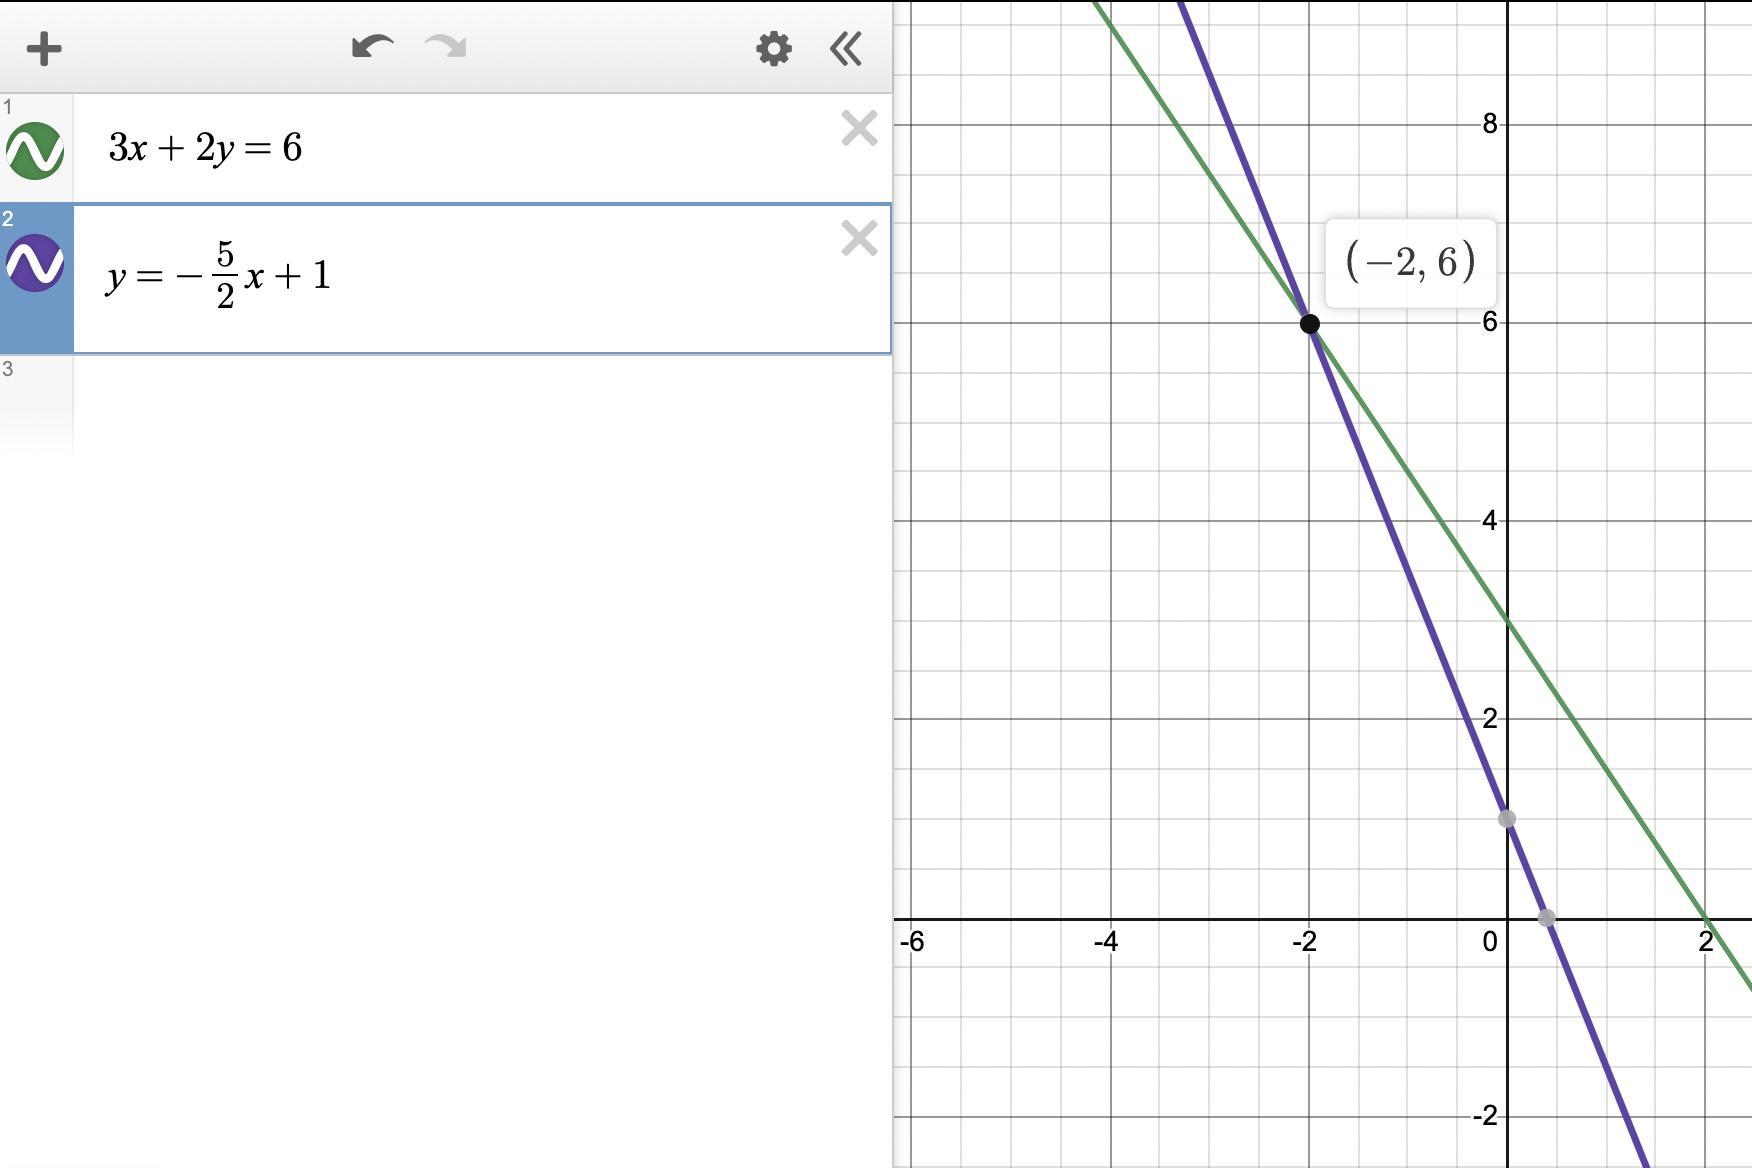 Solve This System Of Equations By Graphing. First Graph The Equations, And Then Type The Solution.3x+2y=6y=5/2x+1